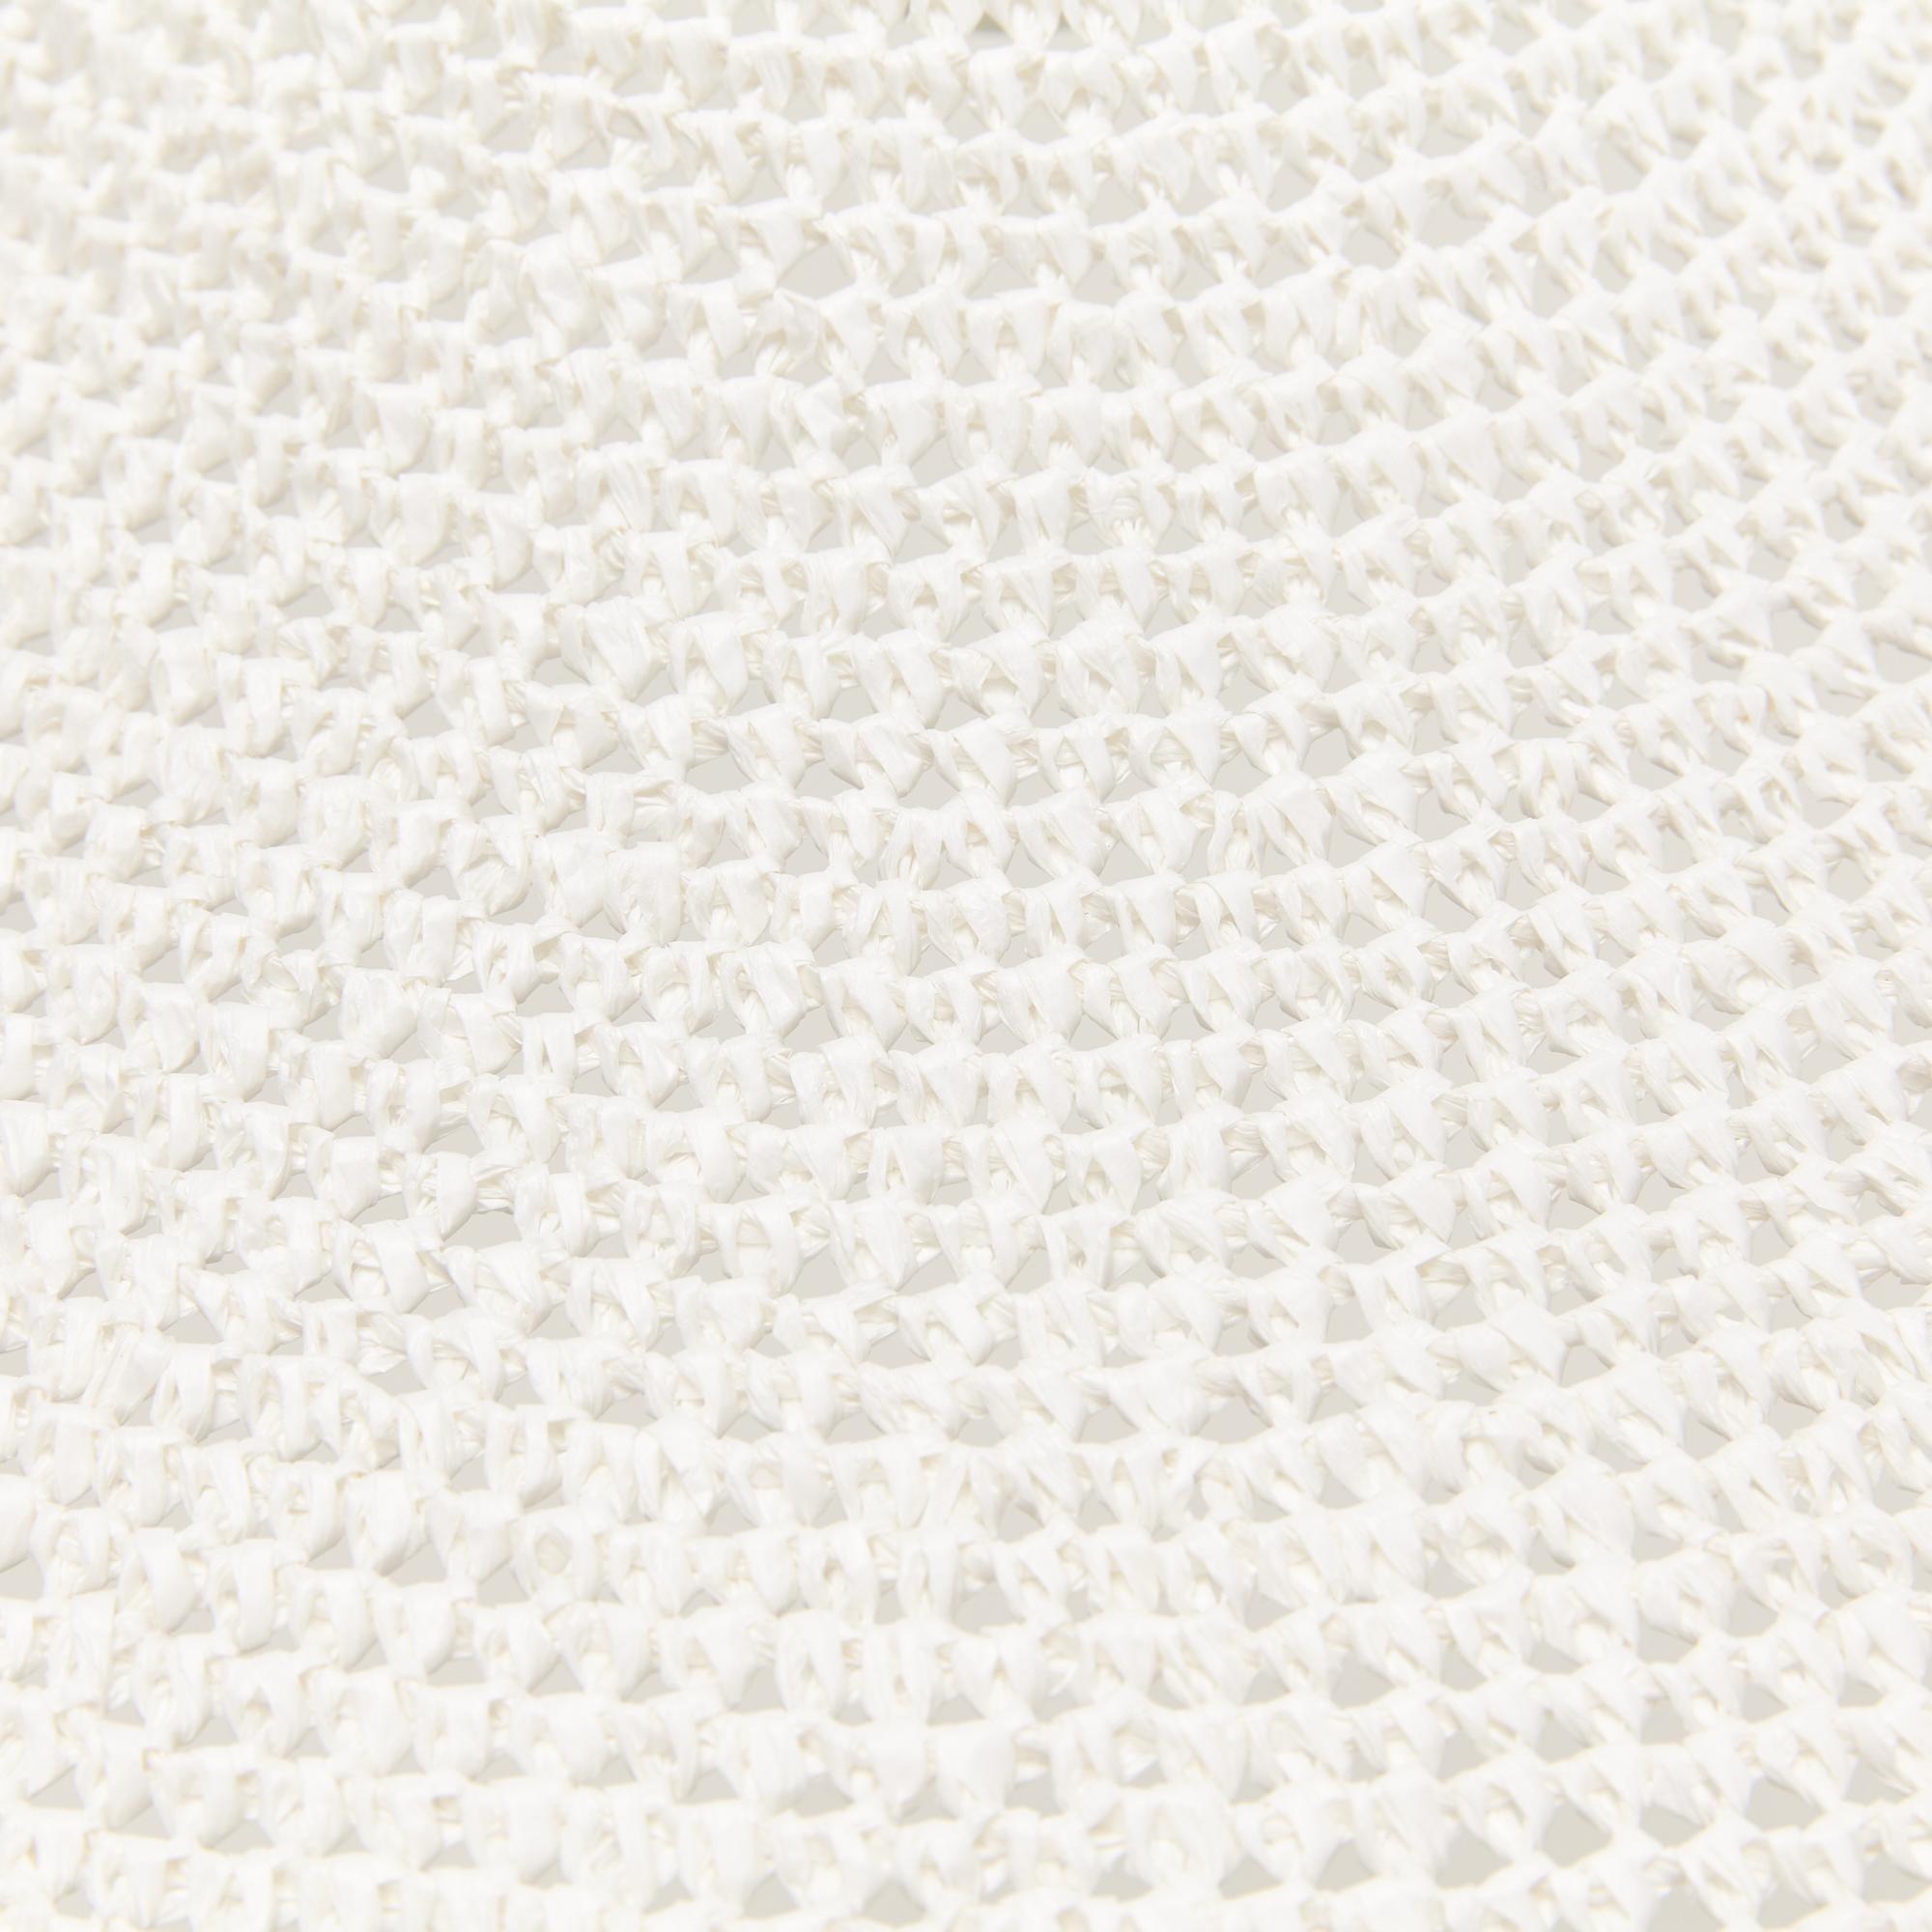 British SS02 Pendant Light Ø60cm/23.6in, Hand Crocheted in 100% Egyptian Cotton For Sale